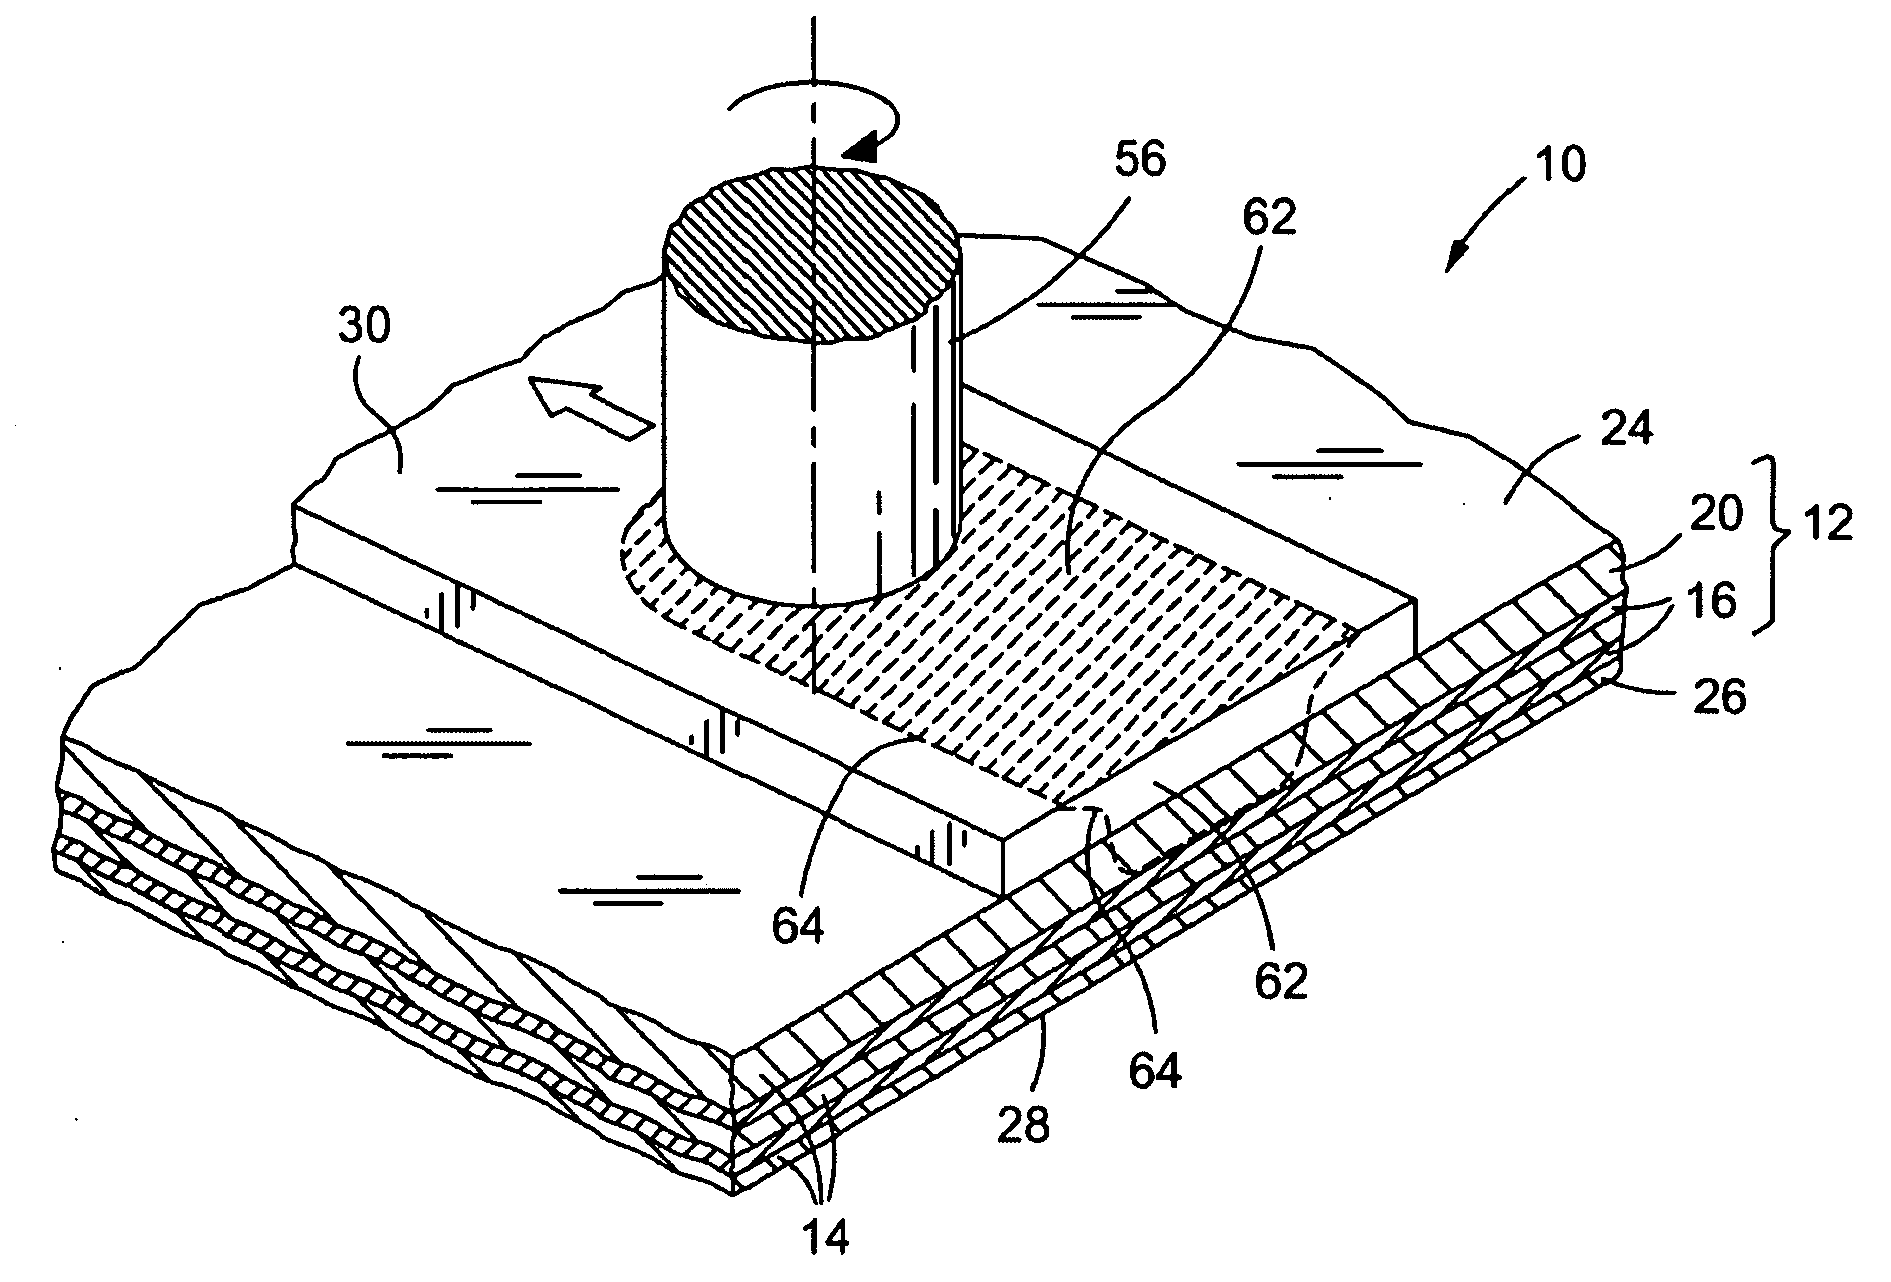 System and method for integrally forming a stiffener with a fiber metal laminate